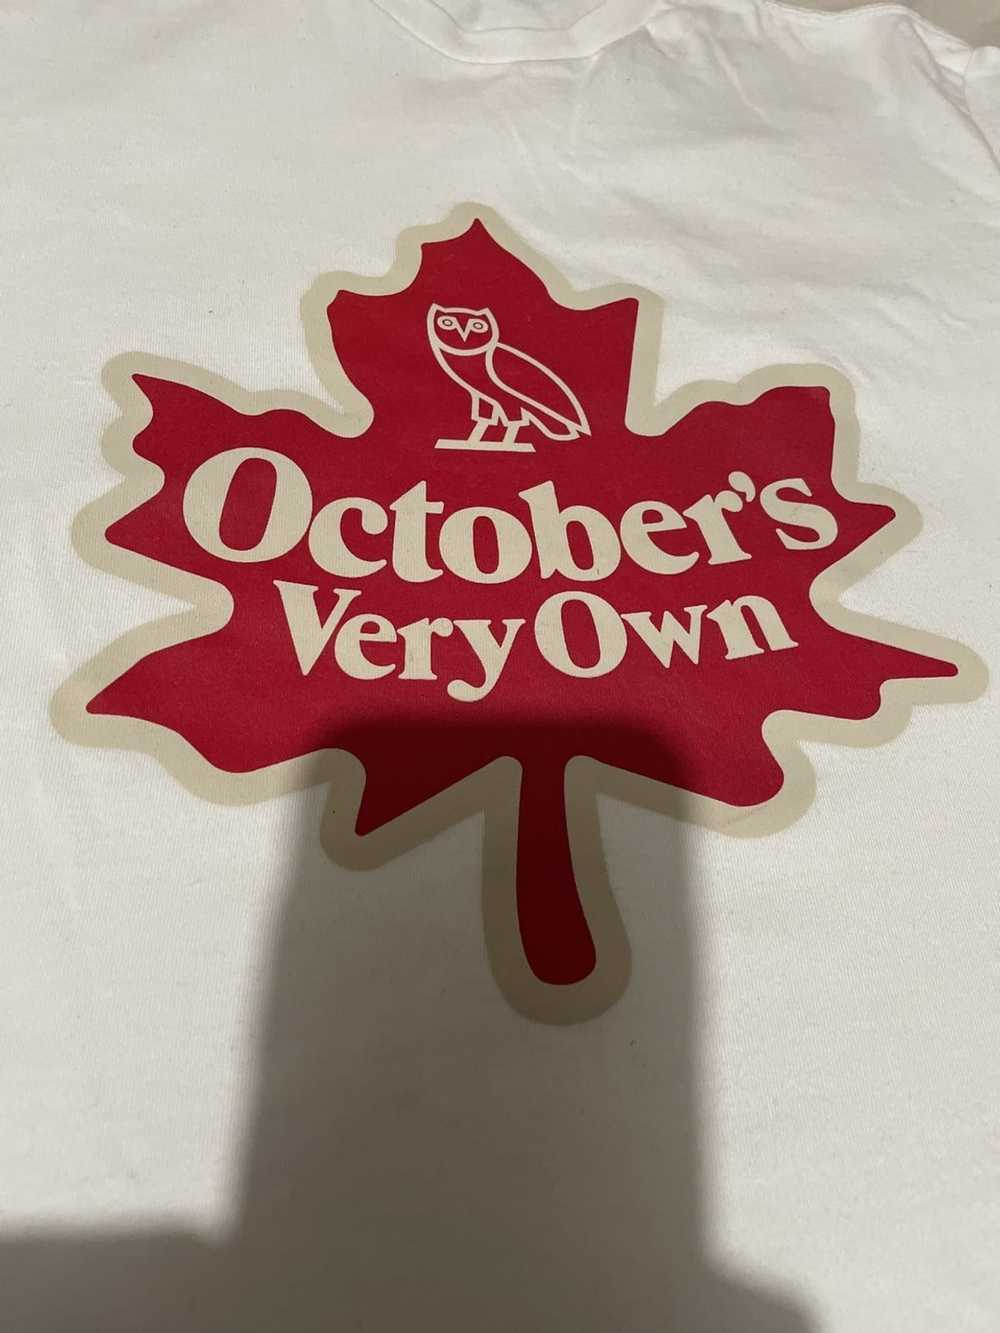 Octobers Very Own OVO Canada maple leaf t shirt - image 2